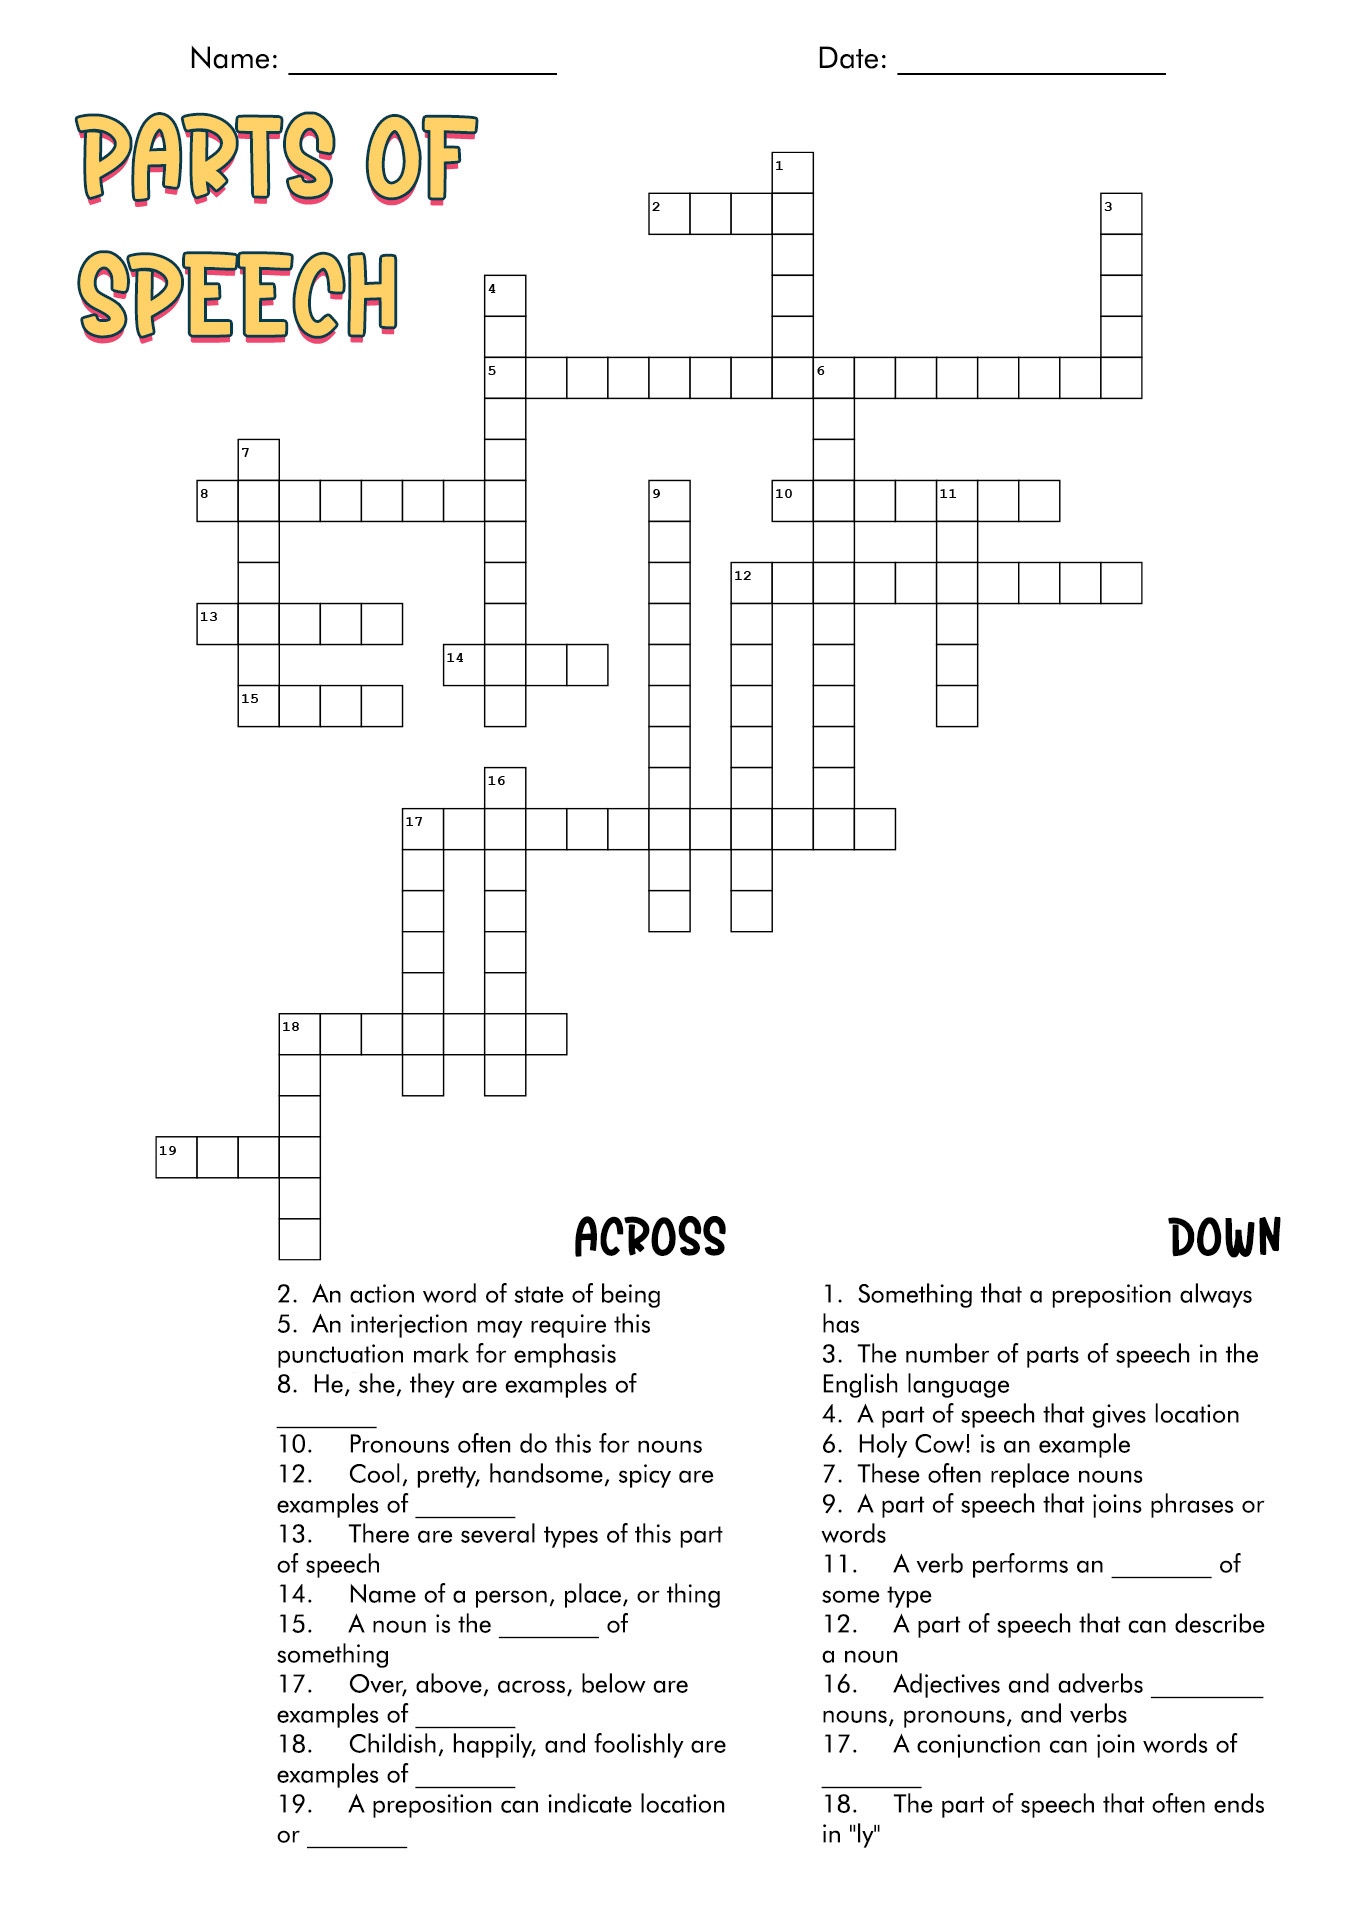 Is Speech Part Crossword Puzzle Answer Image